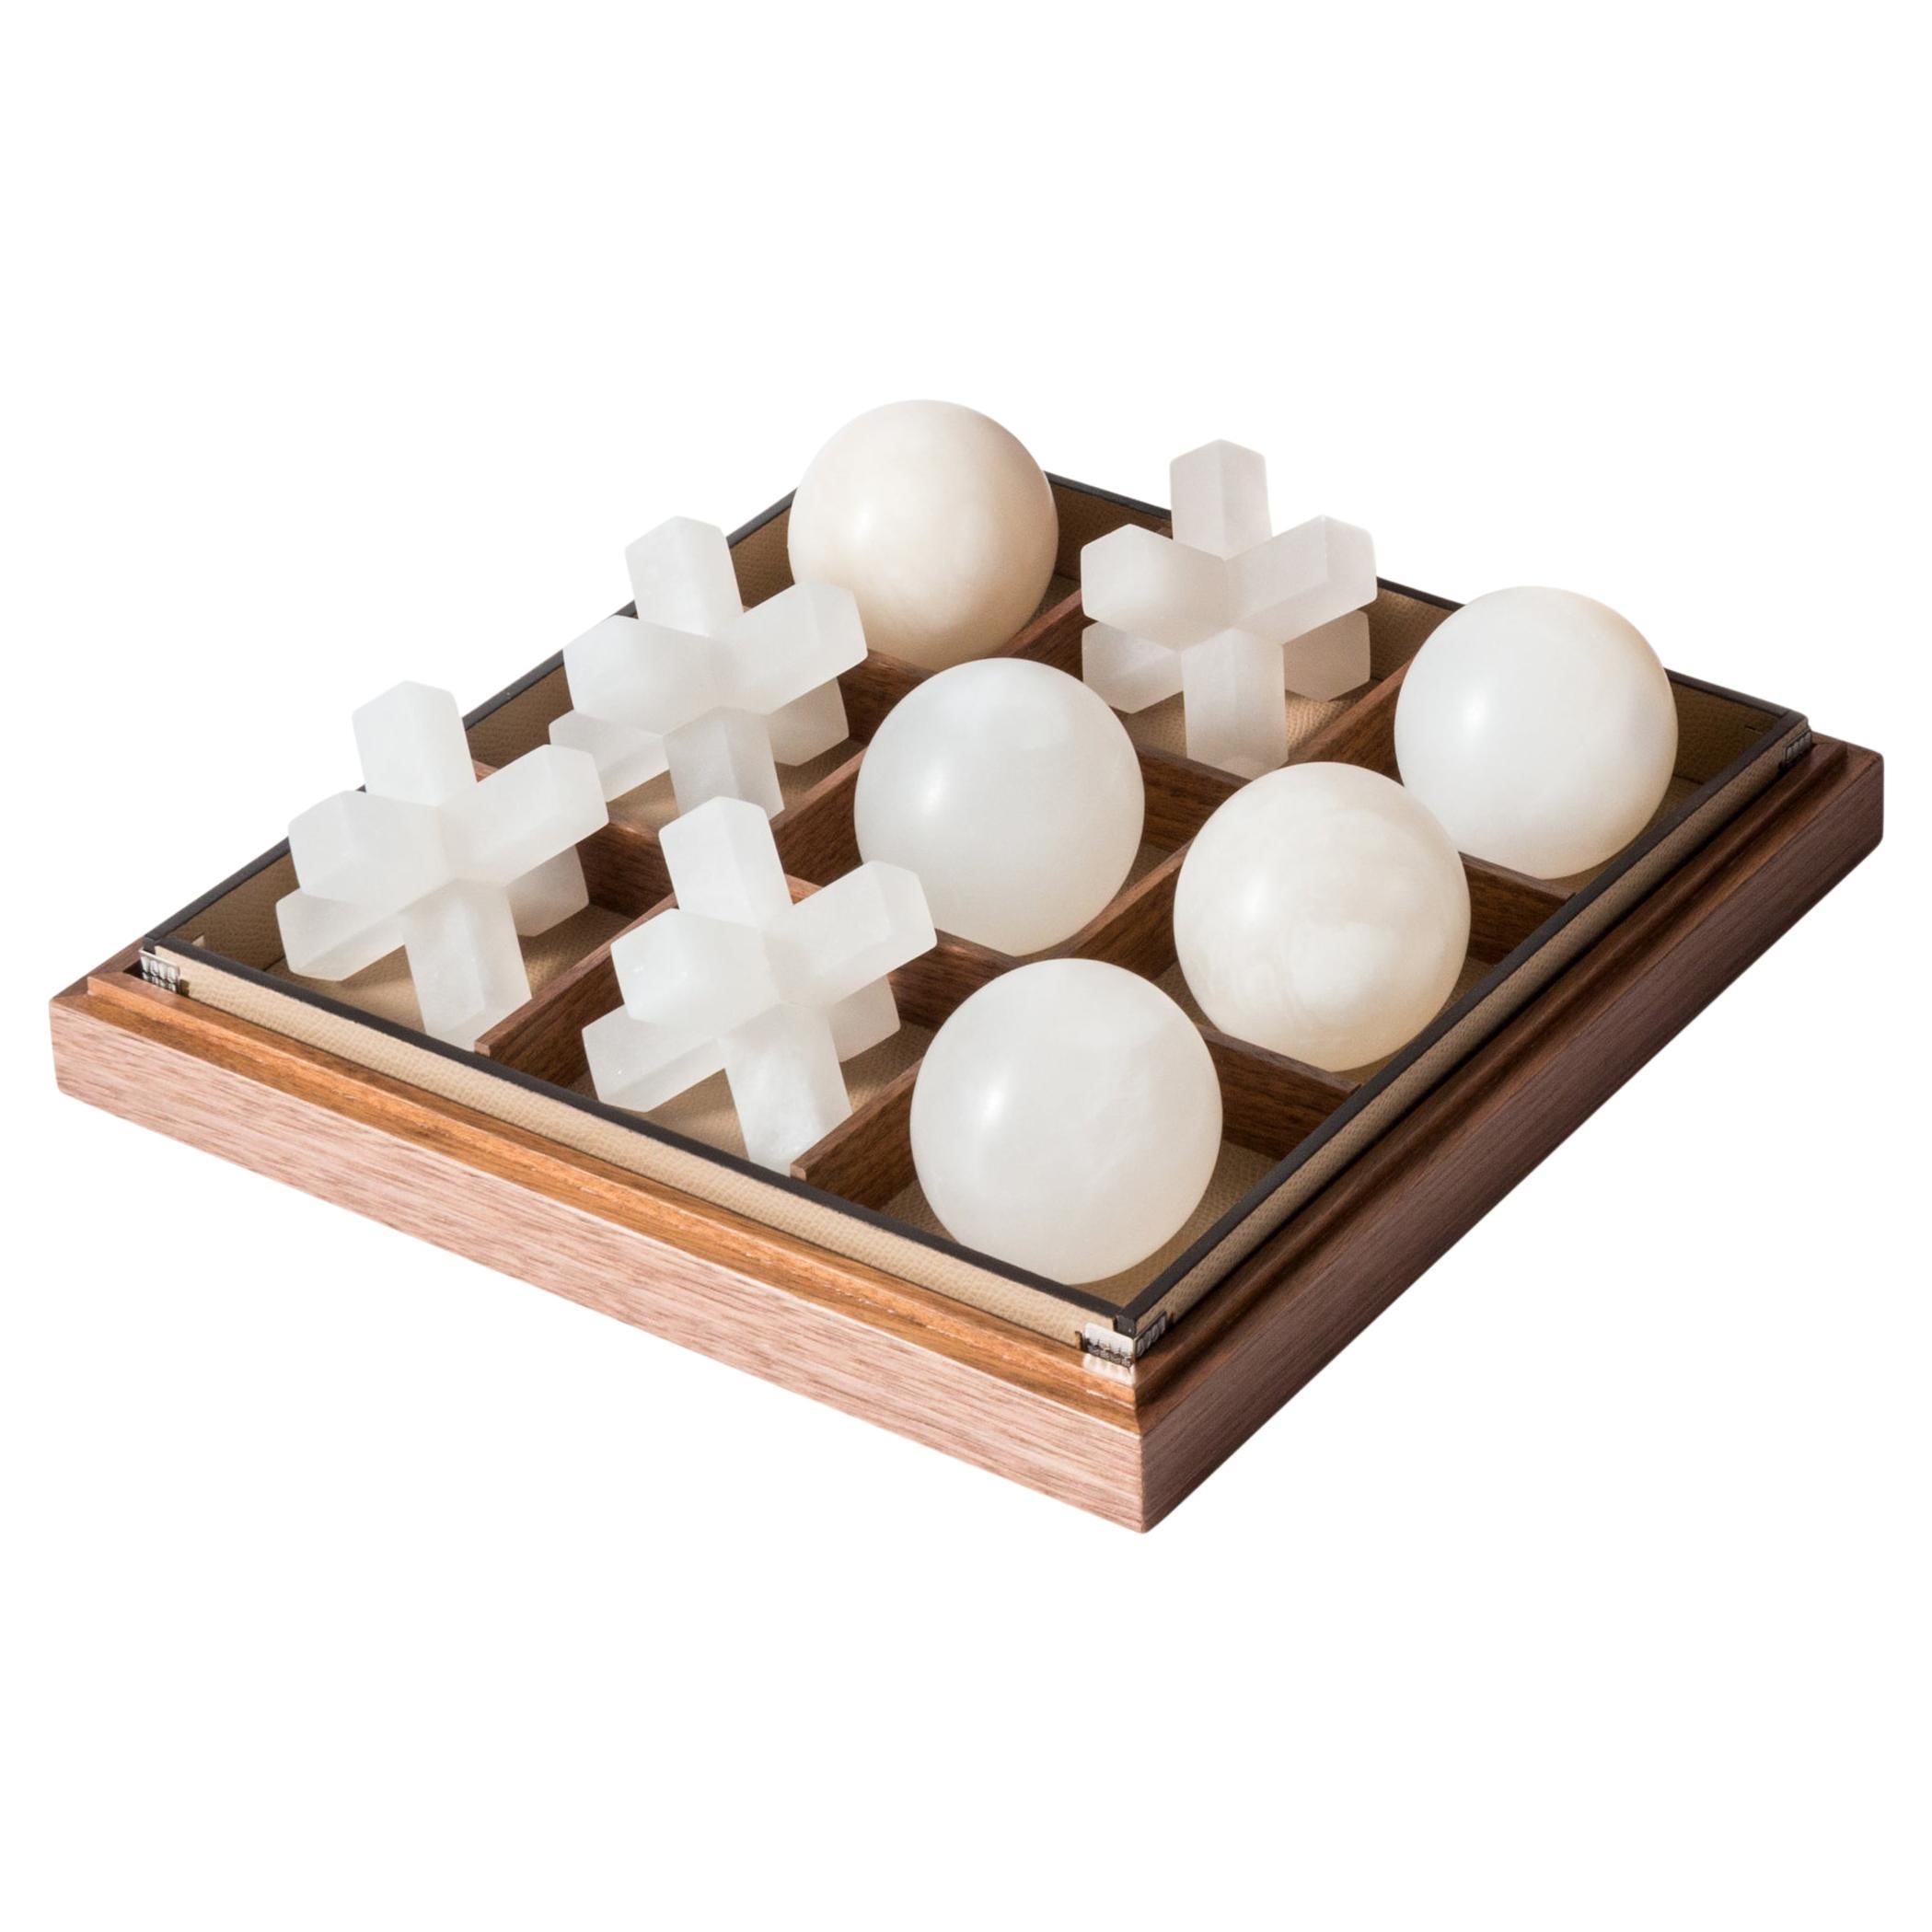 21st Century Italian Tic Tac Toe in Walnut and Leather with Alabaster Pieces